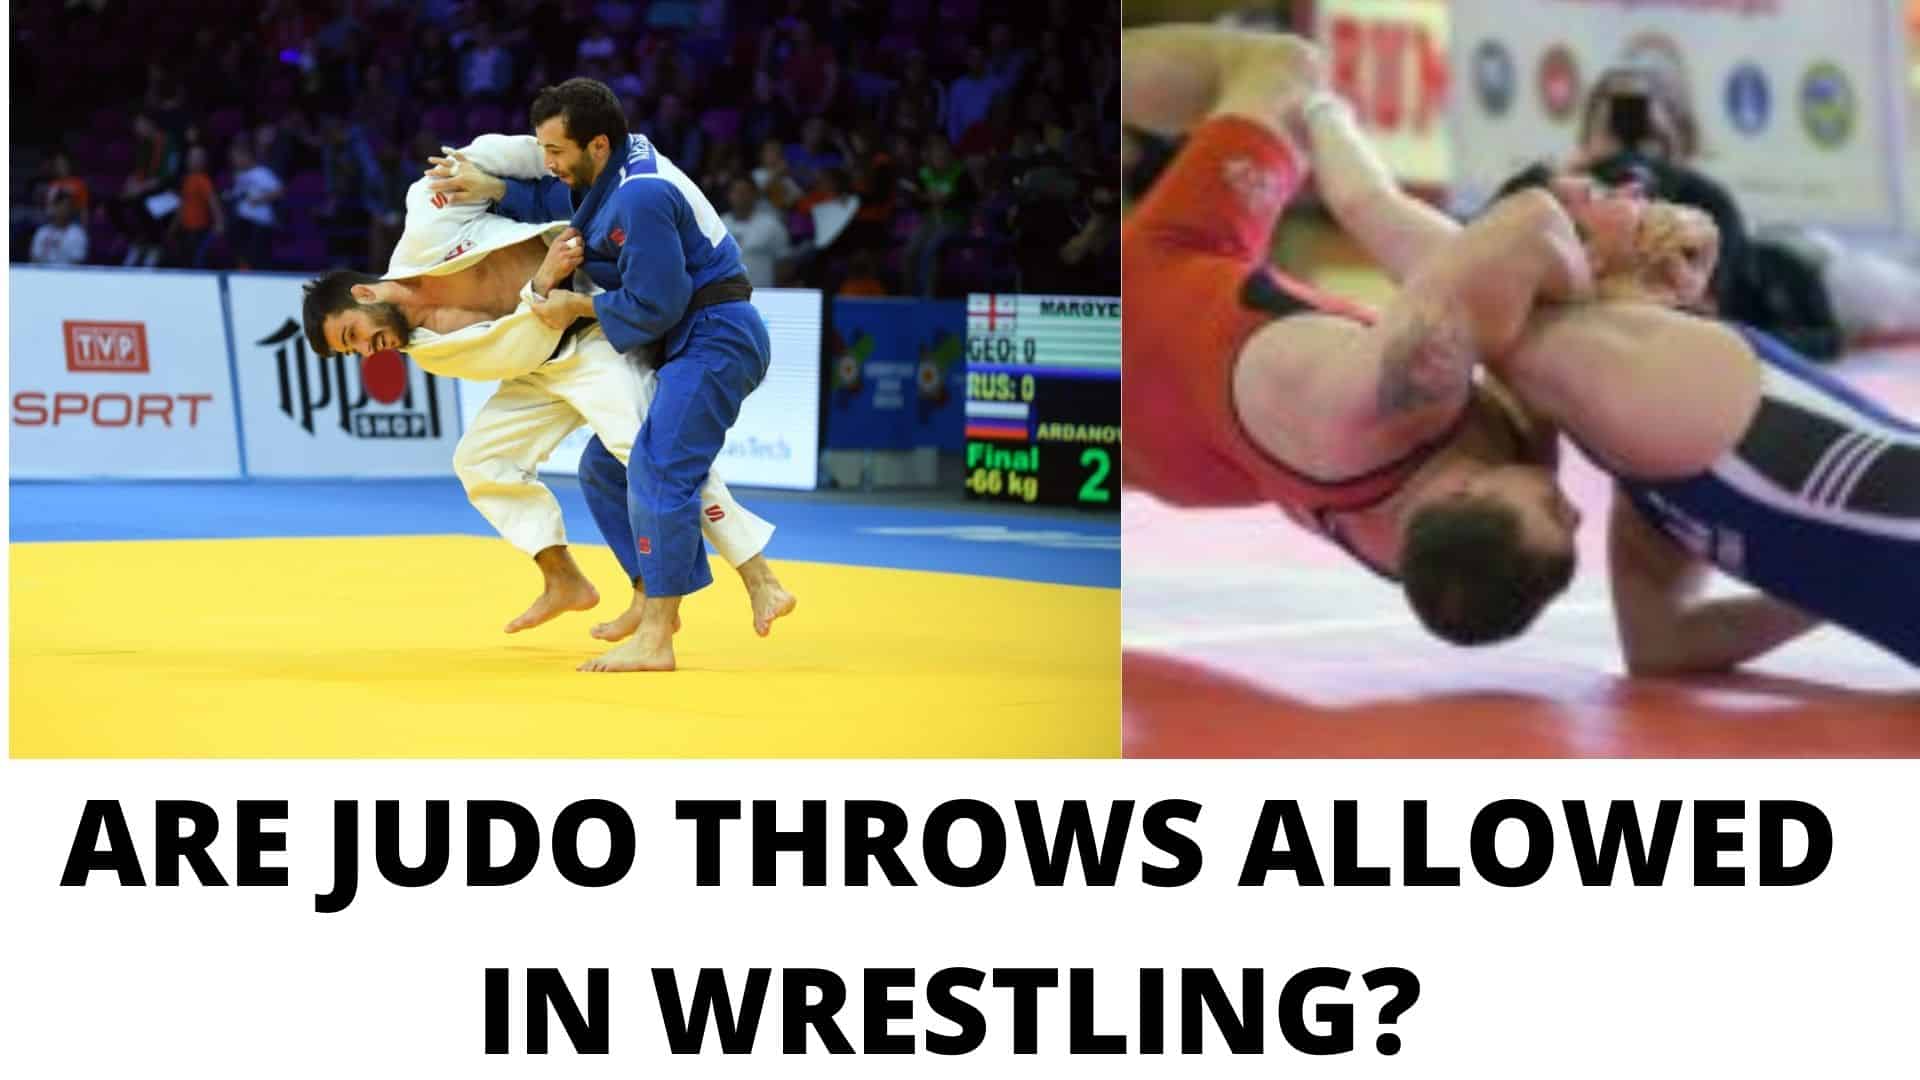 Are Judo throws allowed in wrestling?